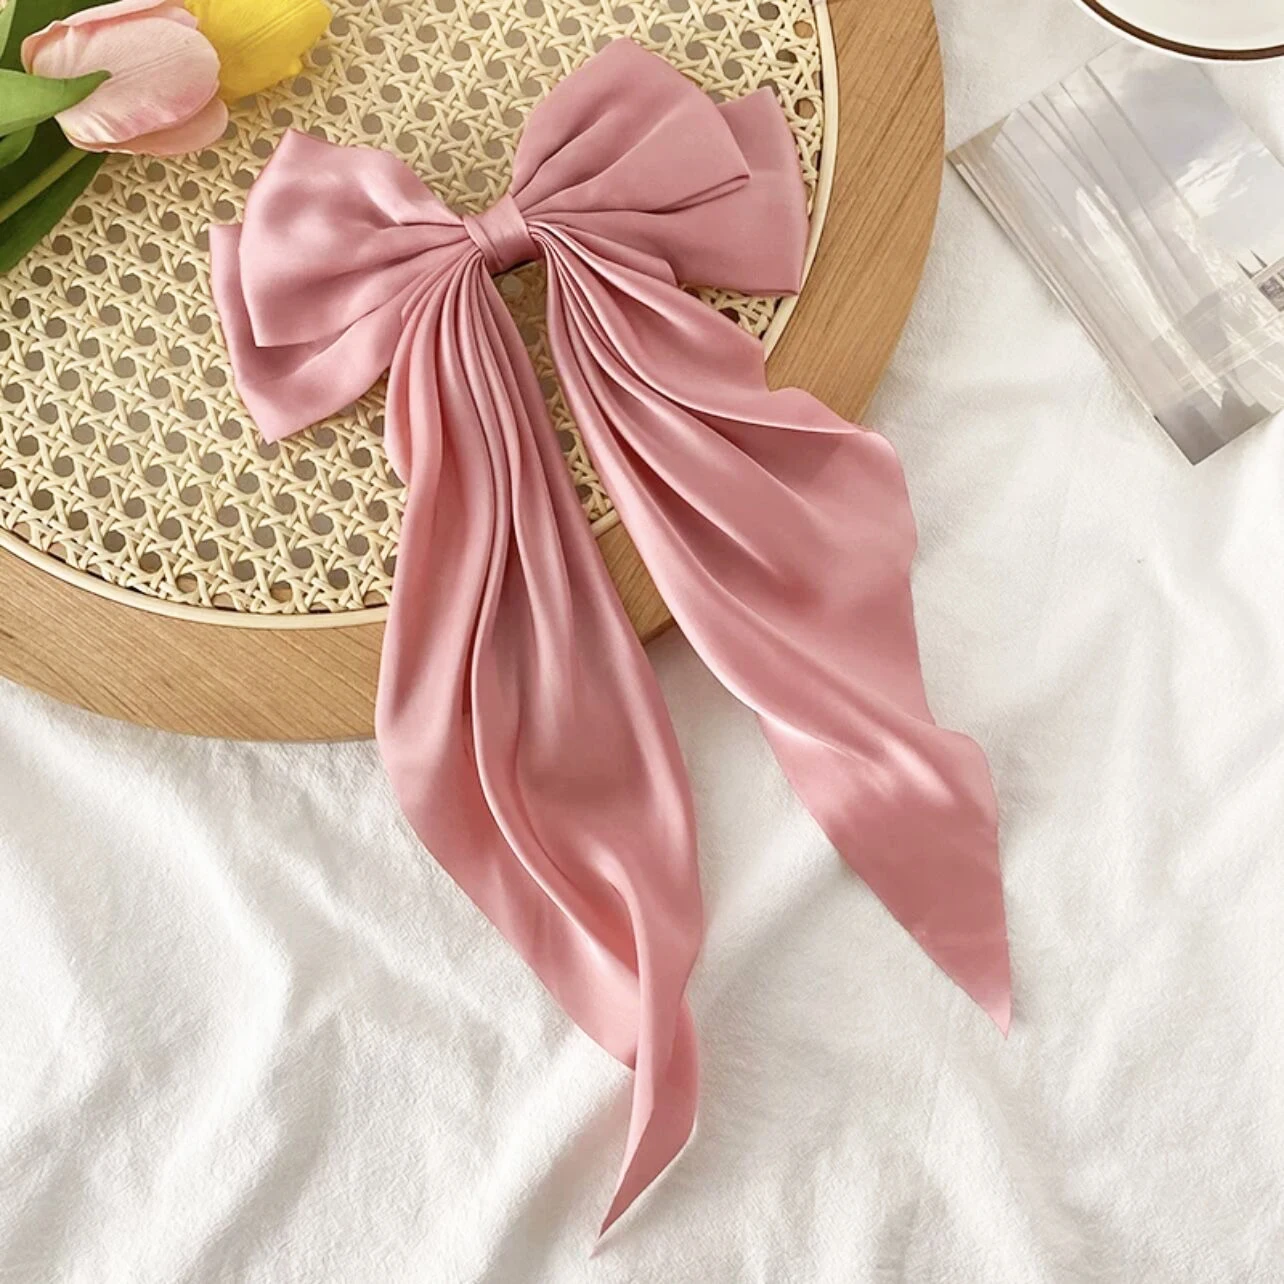 SUN SIGN】Korean Ribbon Bow Rose Hair Clip Ponytail Big-name Fashion  All-match Hairpin Ribbons tie ties accessories for Women